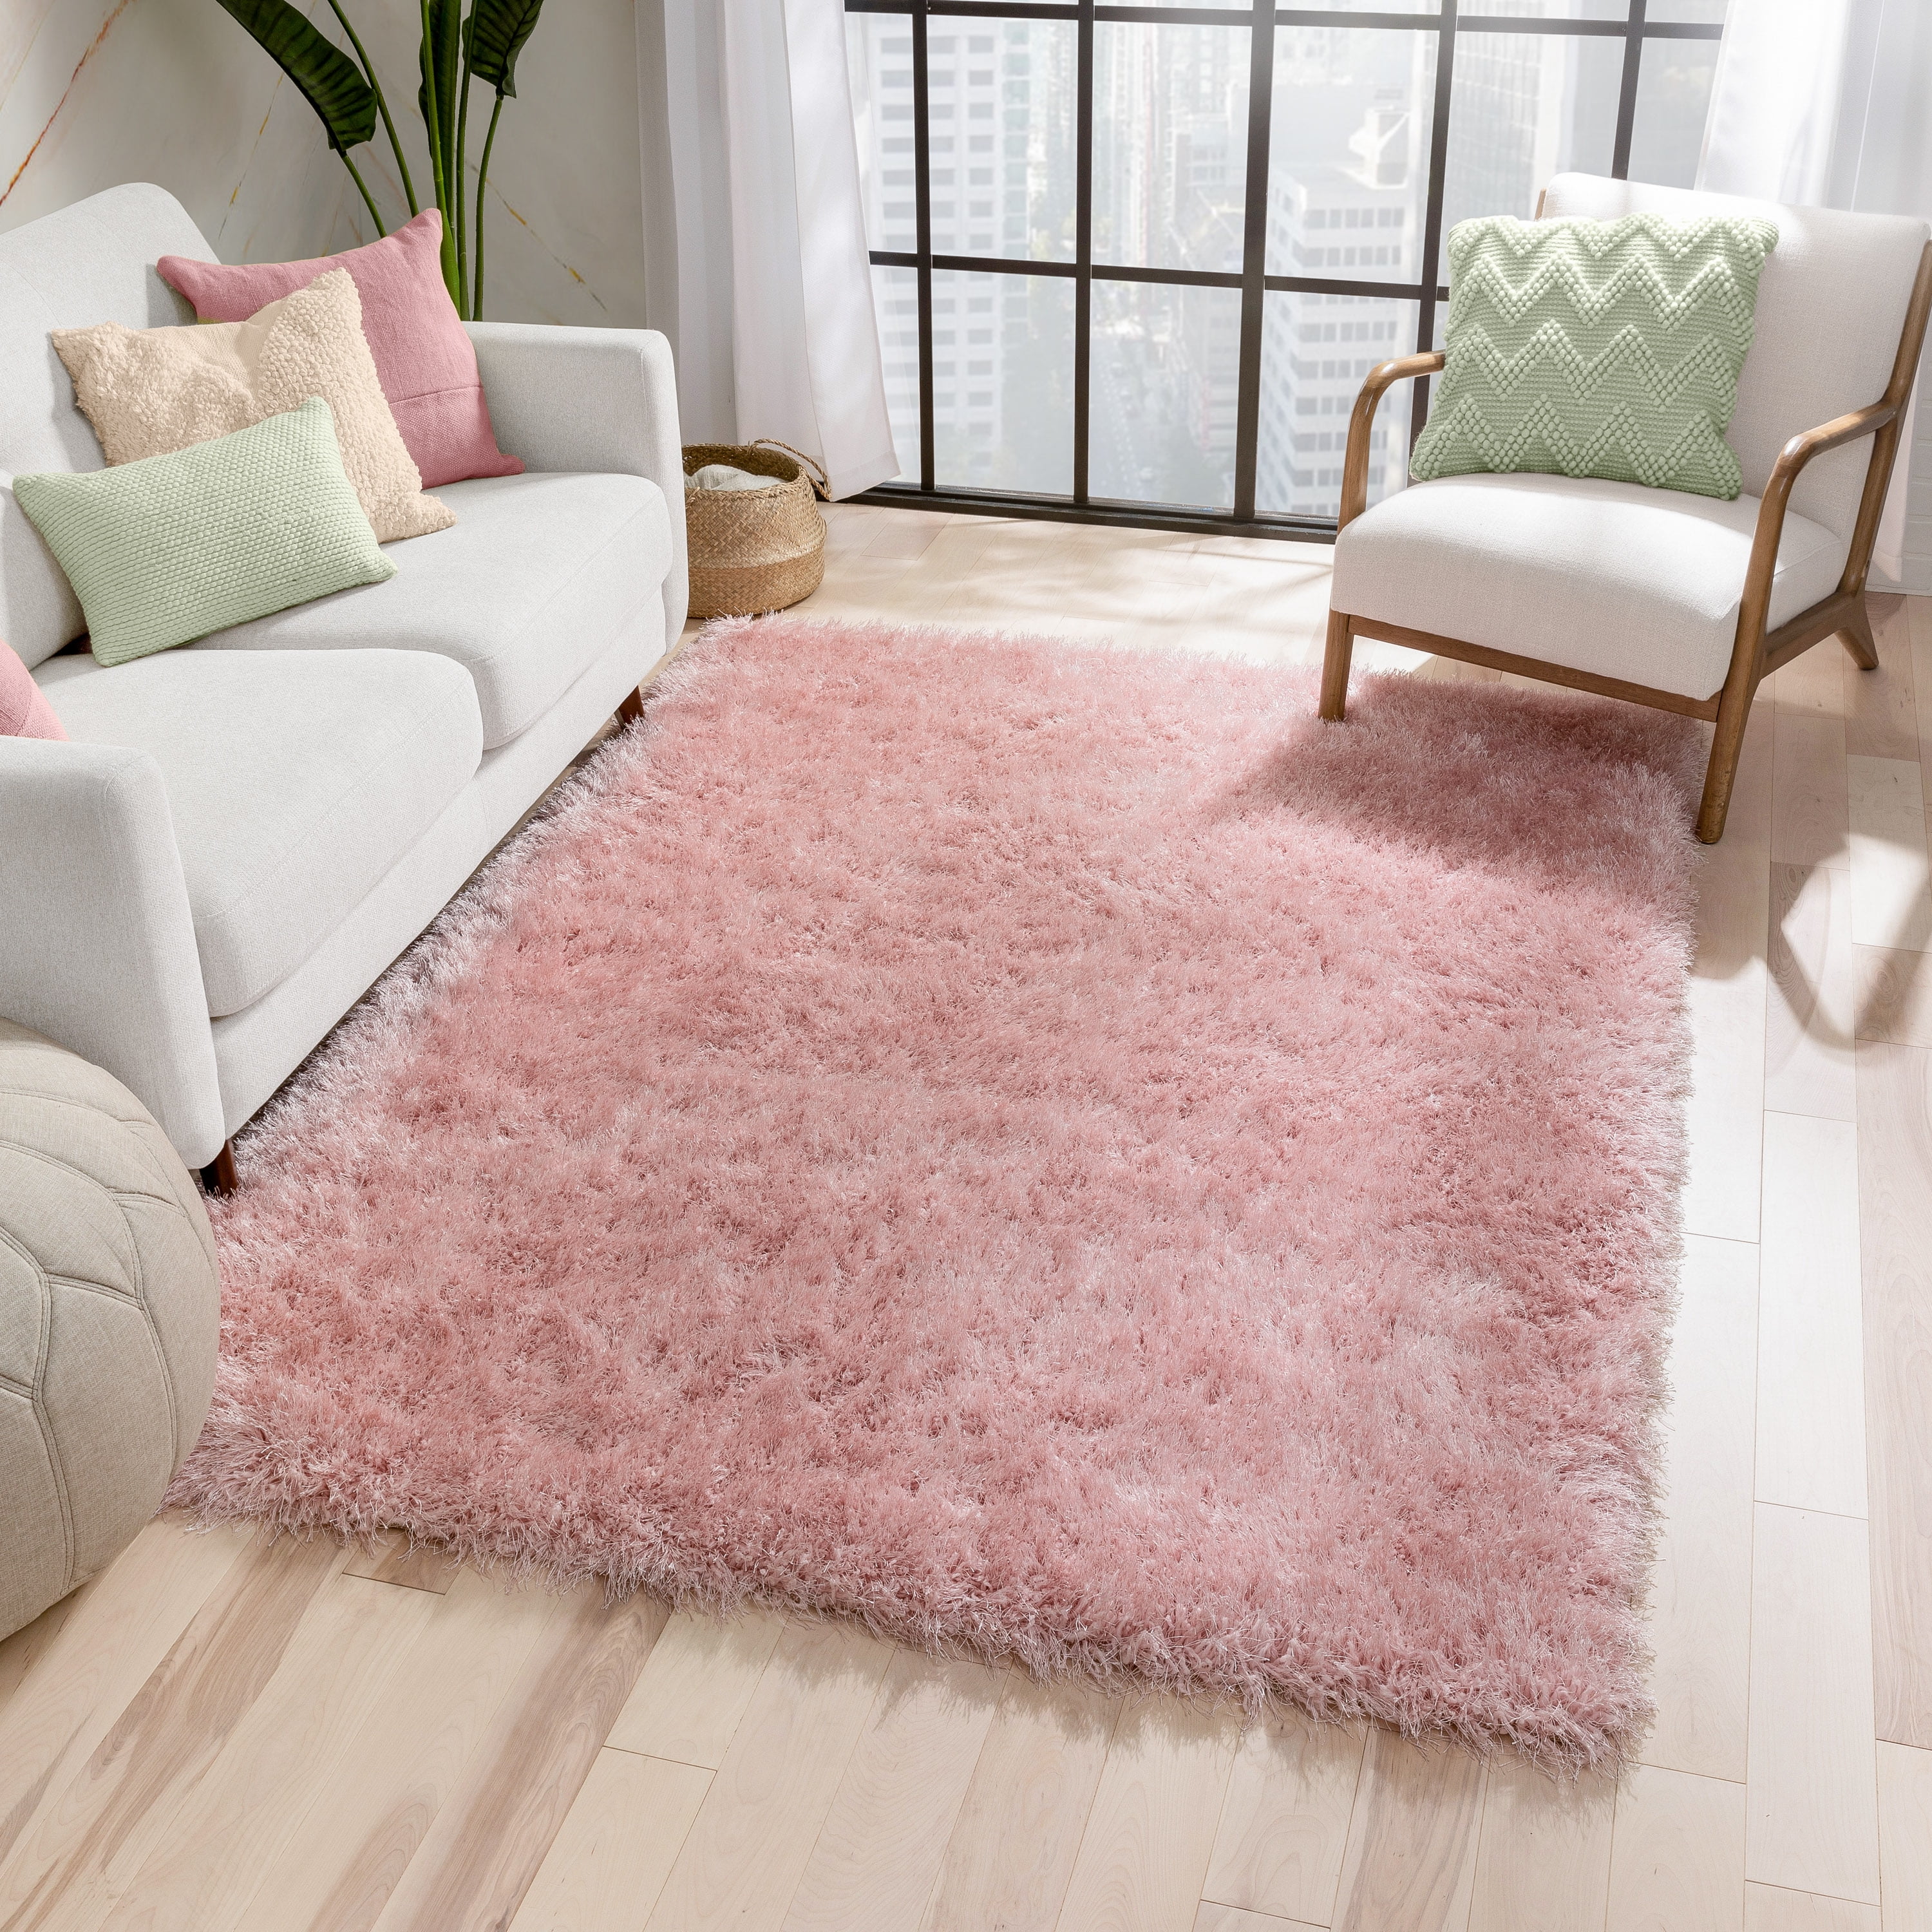 Blush Millennial Pink Living Room Rugs Soft Non Shed Cosy Bedroom Rug Cheap Mats 